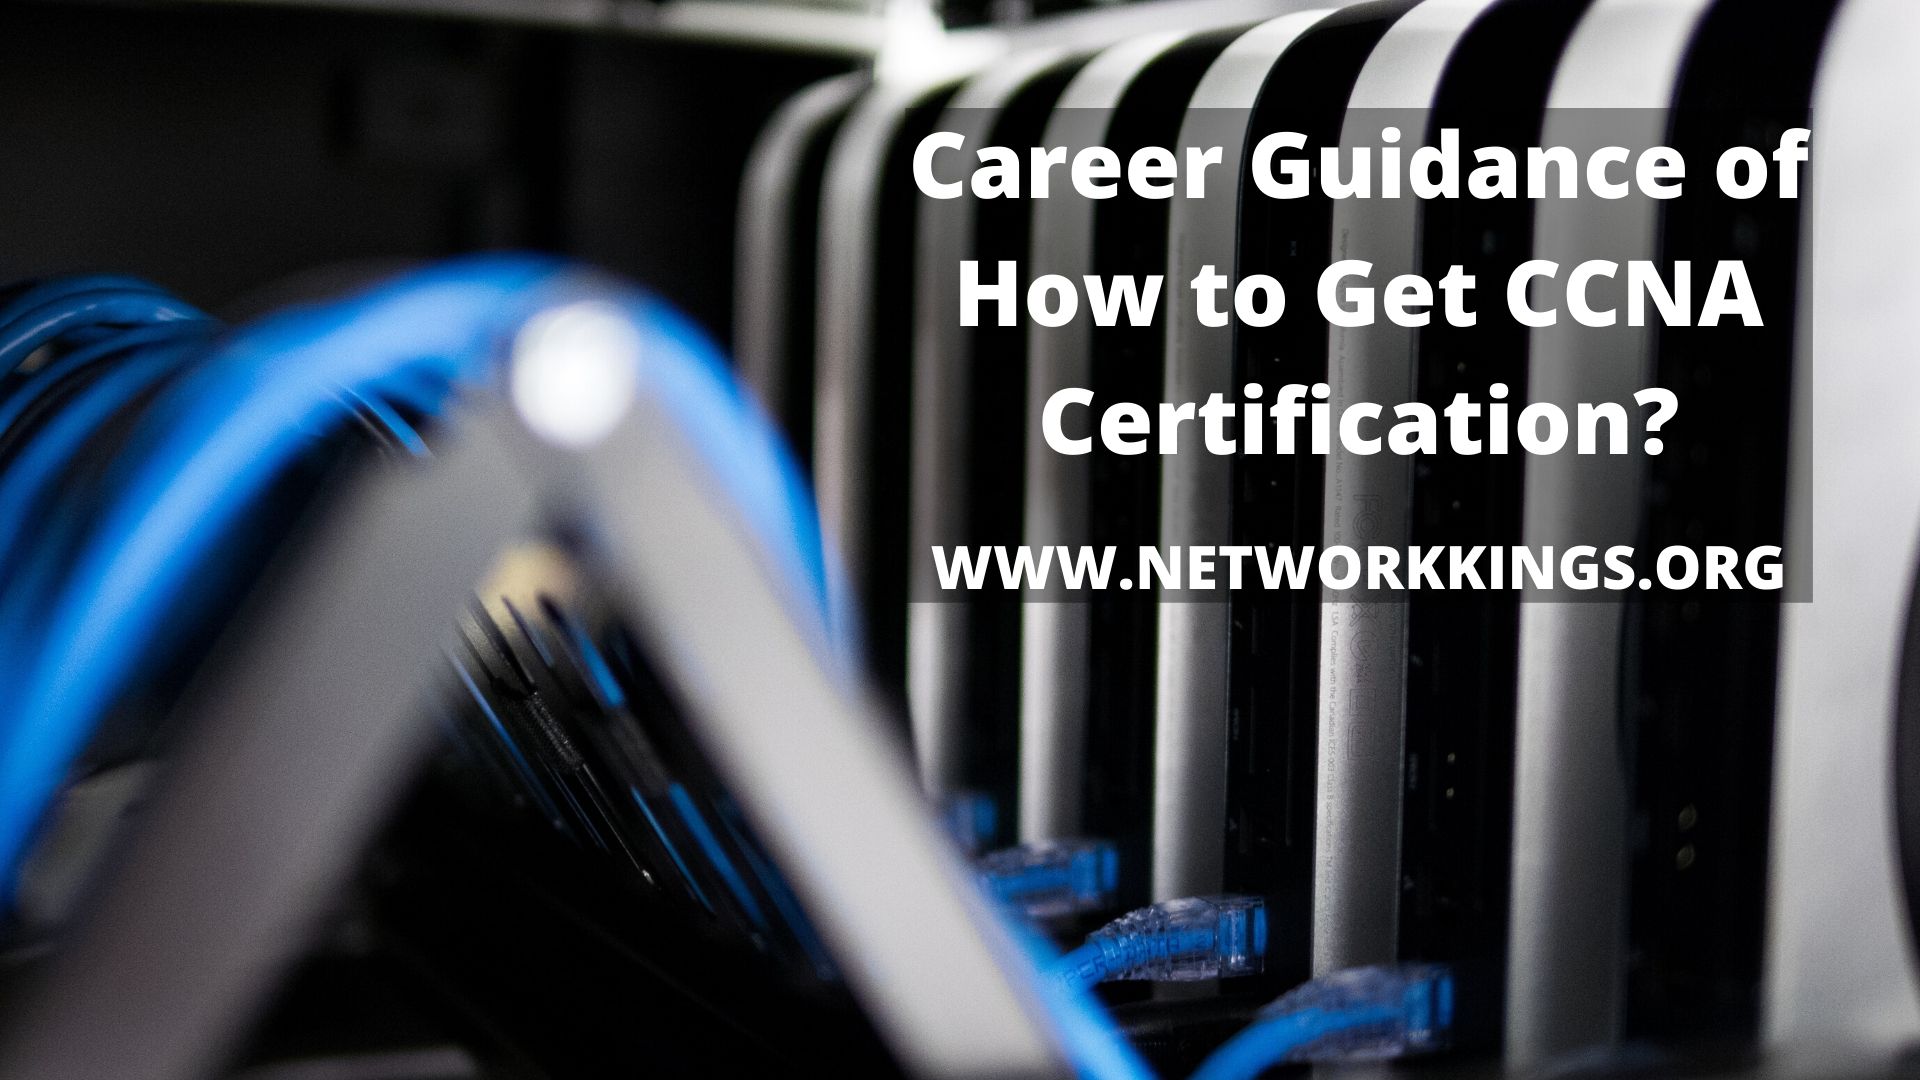 Get Career Guidance of How to Get CCNA Certification?